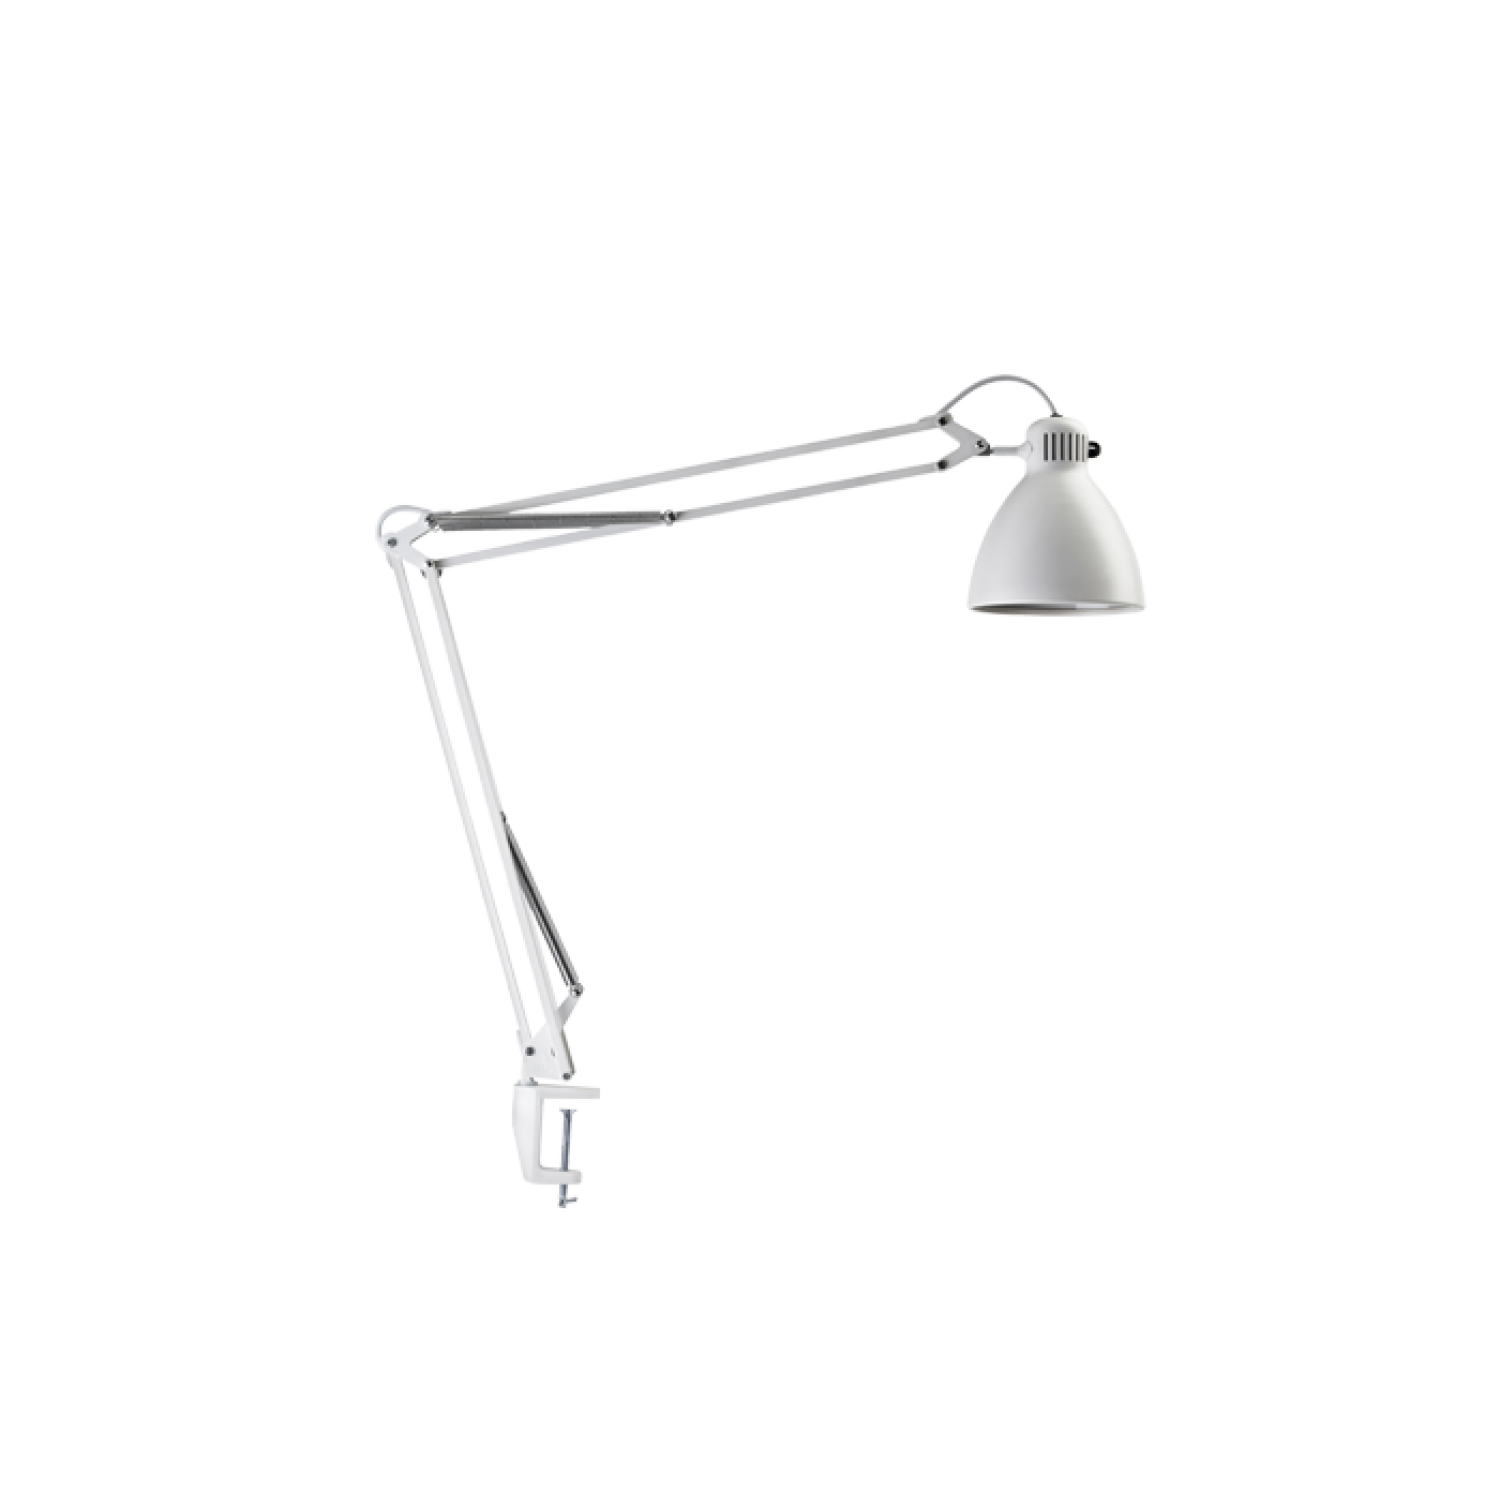 White light L-1 Luxo edge LED clamp, with task